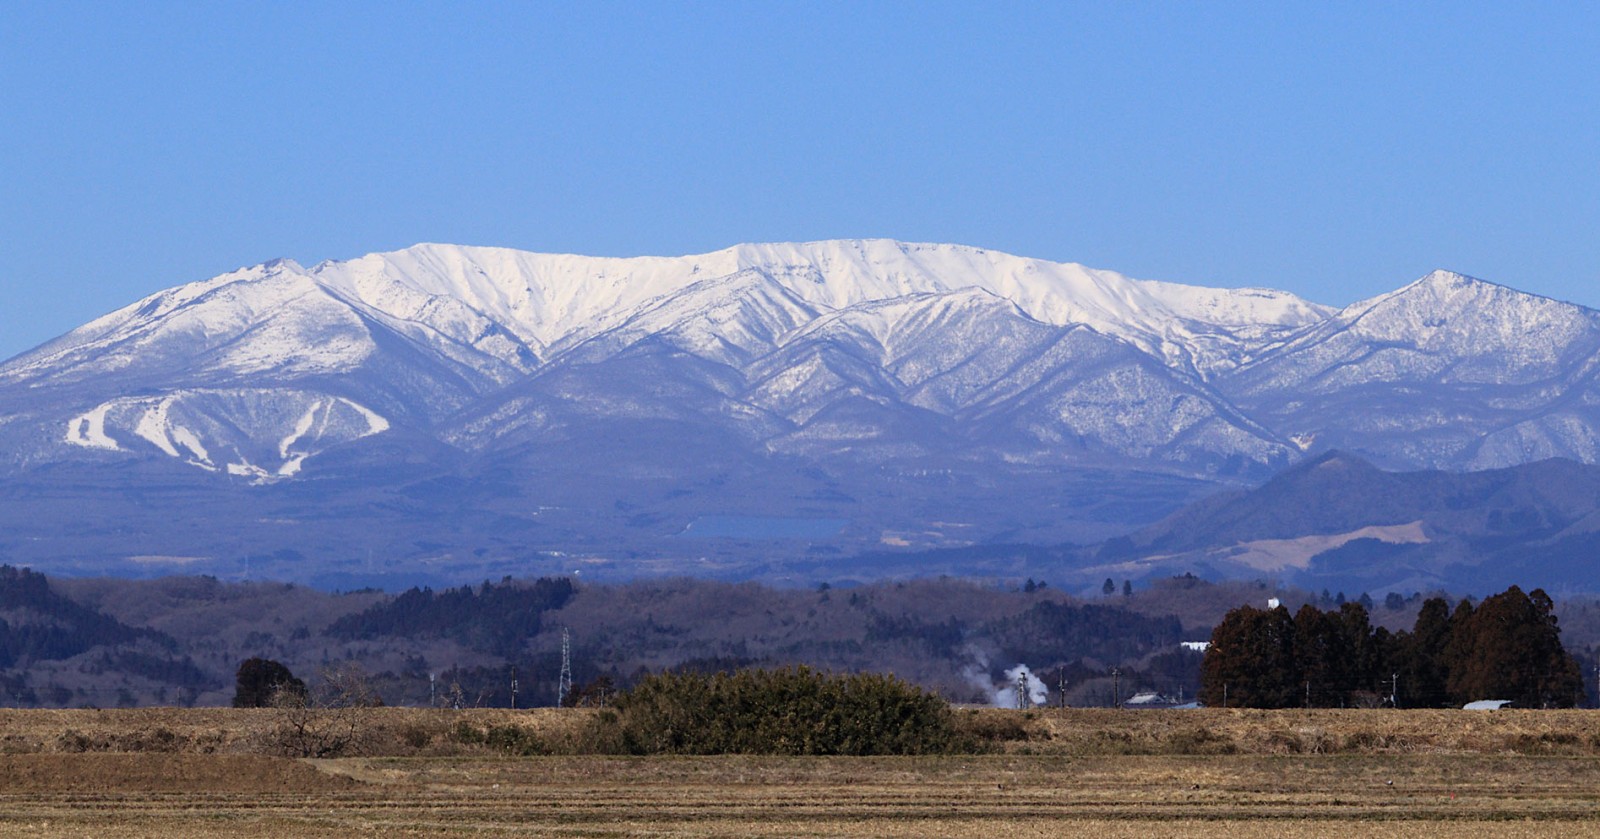 Kakuda is a small city in northern Japan, surrounded by mountains.